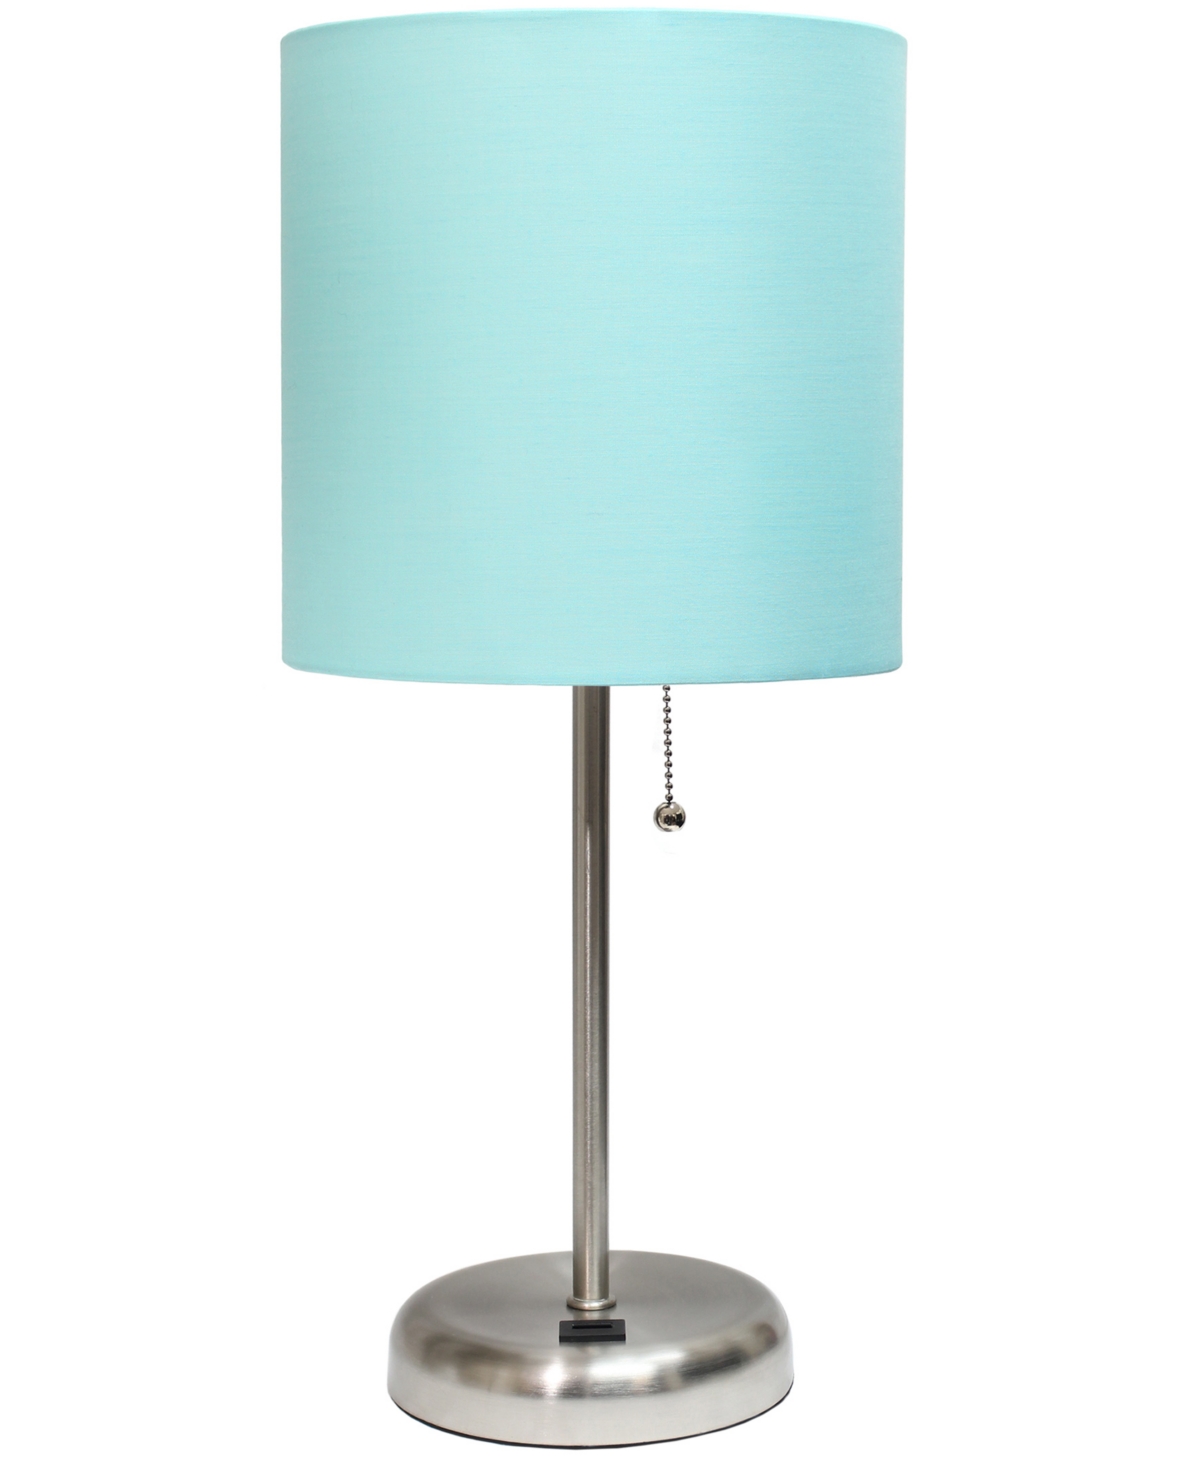 Shop Creekwood Home Oslo 19.5" Contemporary Bedside Usb Port Feature Standard Metal Table Desk Lamp In Br.steel,teal Shade